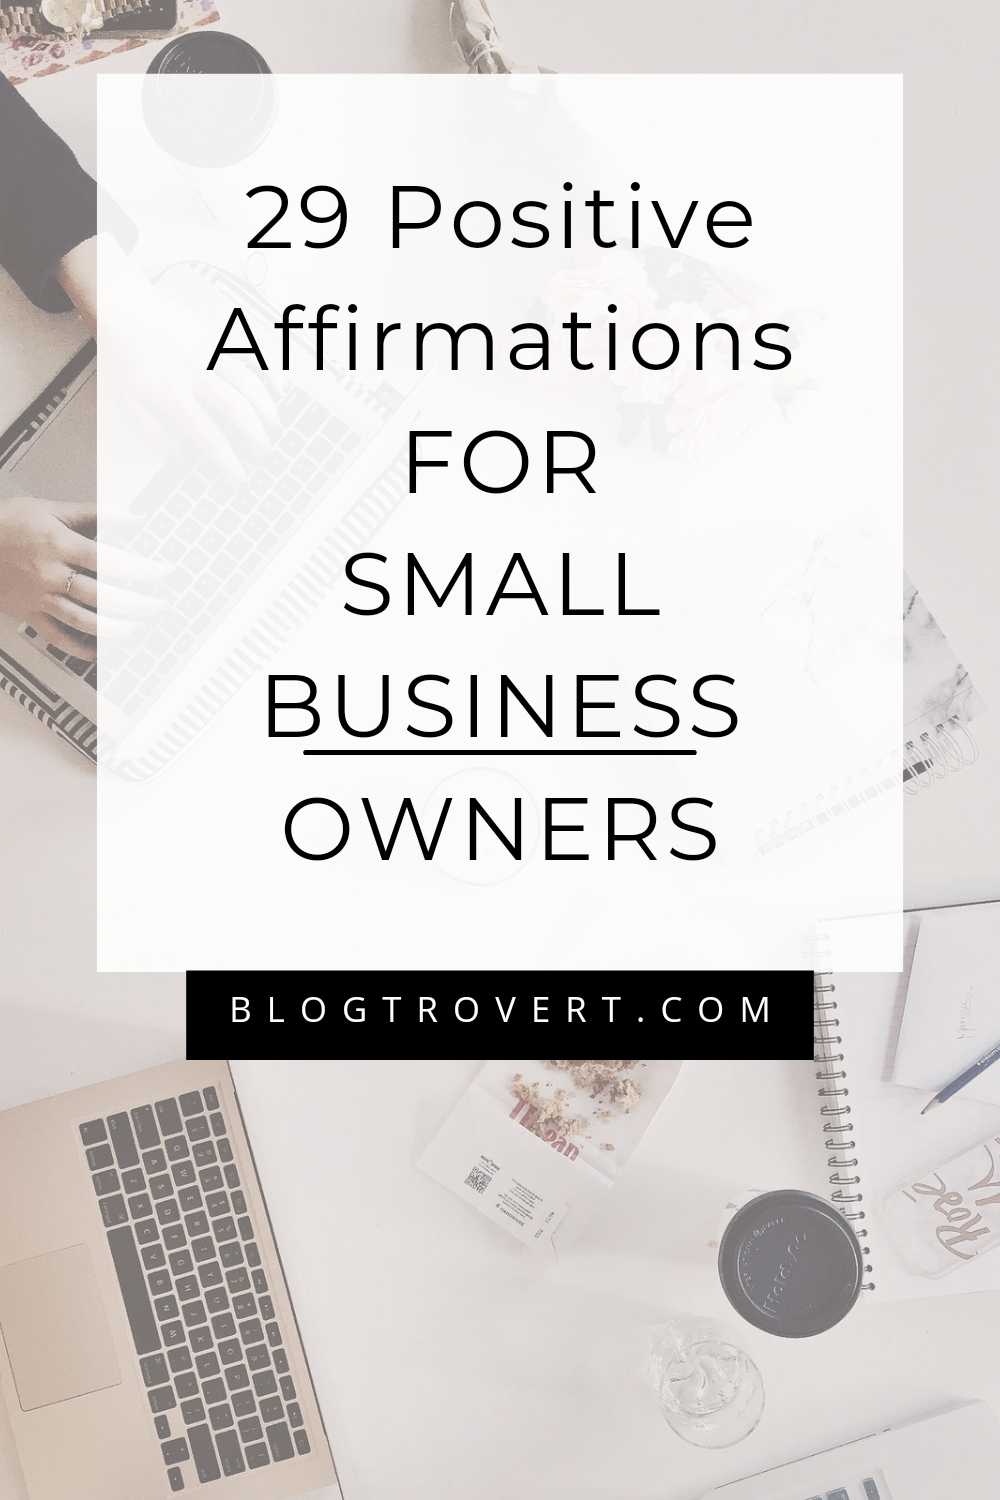 Affirmations for business owners